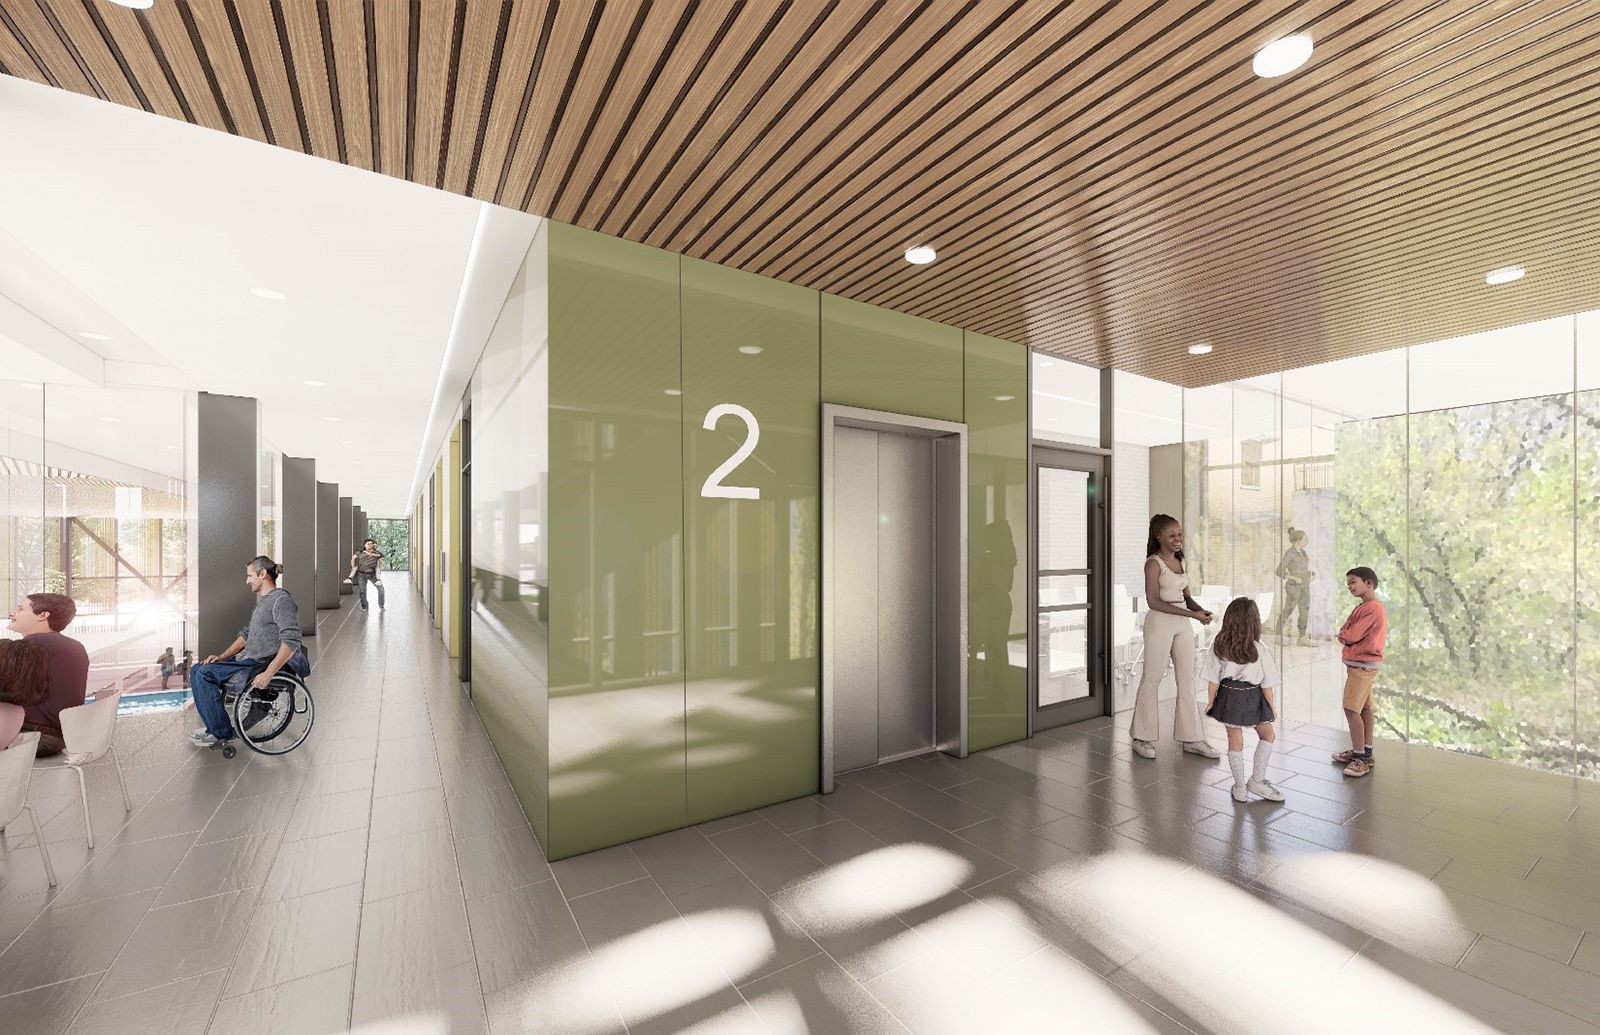 A rendering of the second floor lobby. On the right, people wait for the elevator. To the right of the elevator is the entrance to a meeting room. Furthest right are floor to ceiling, east-facing windows. On the left side of the image is a glass wall that provides view into the pool space. The hallway between the glass viewing space and the elevator leads to the rest of the second floor.